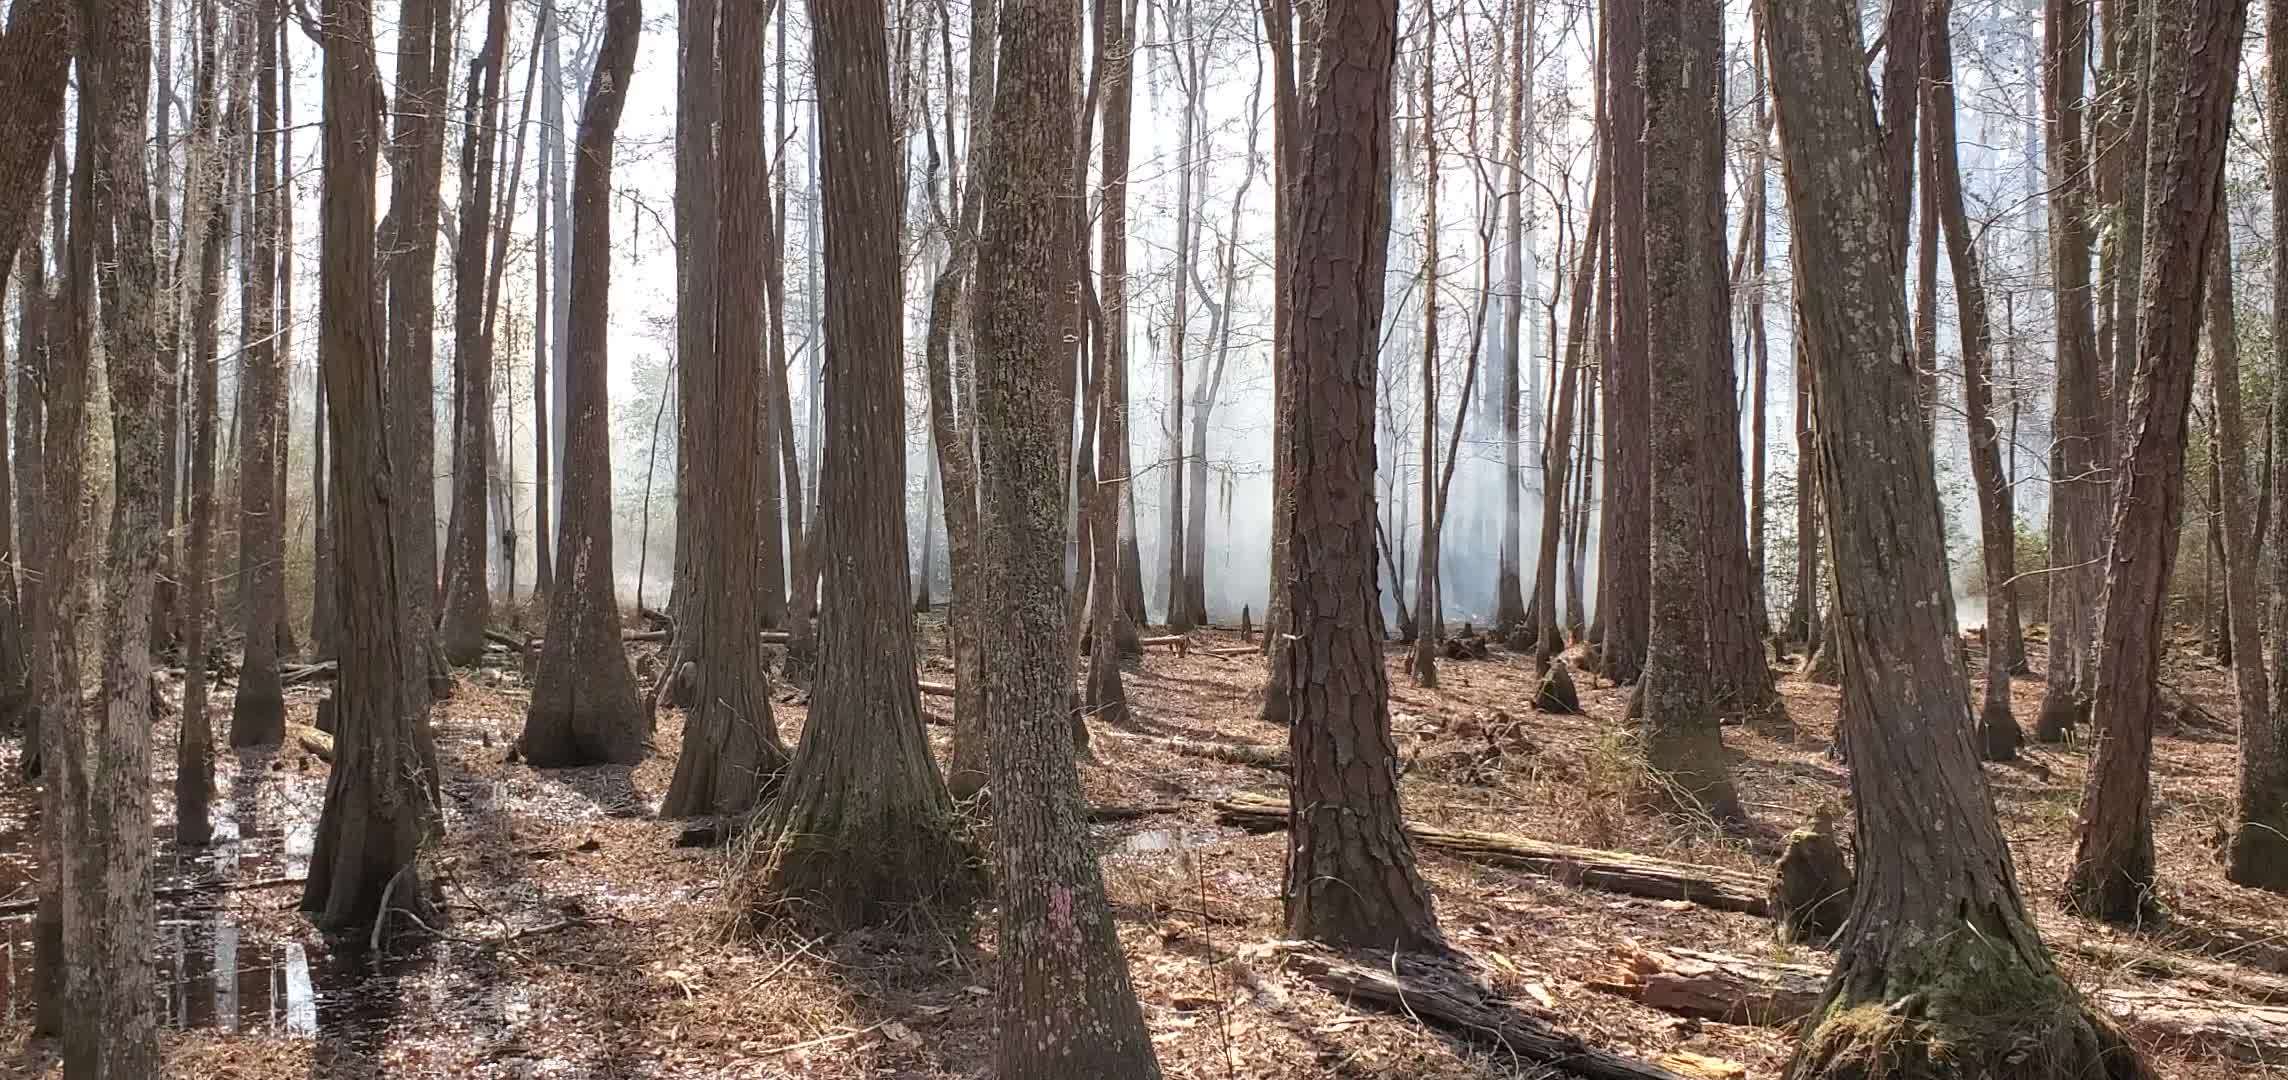 Movie: Smoke in the swamp (12M)